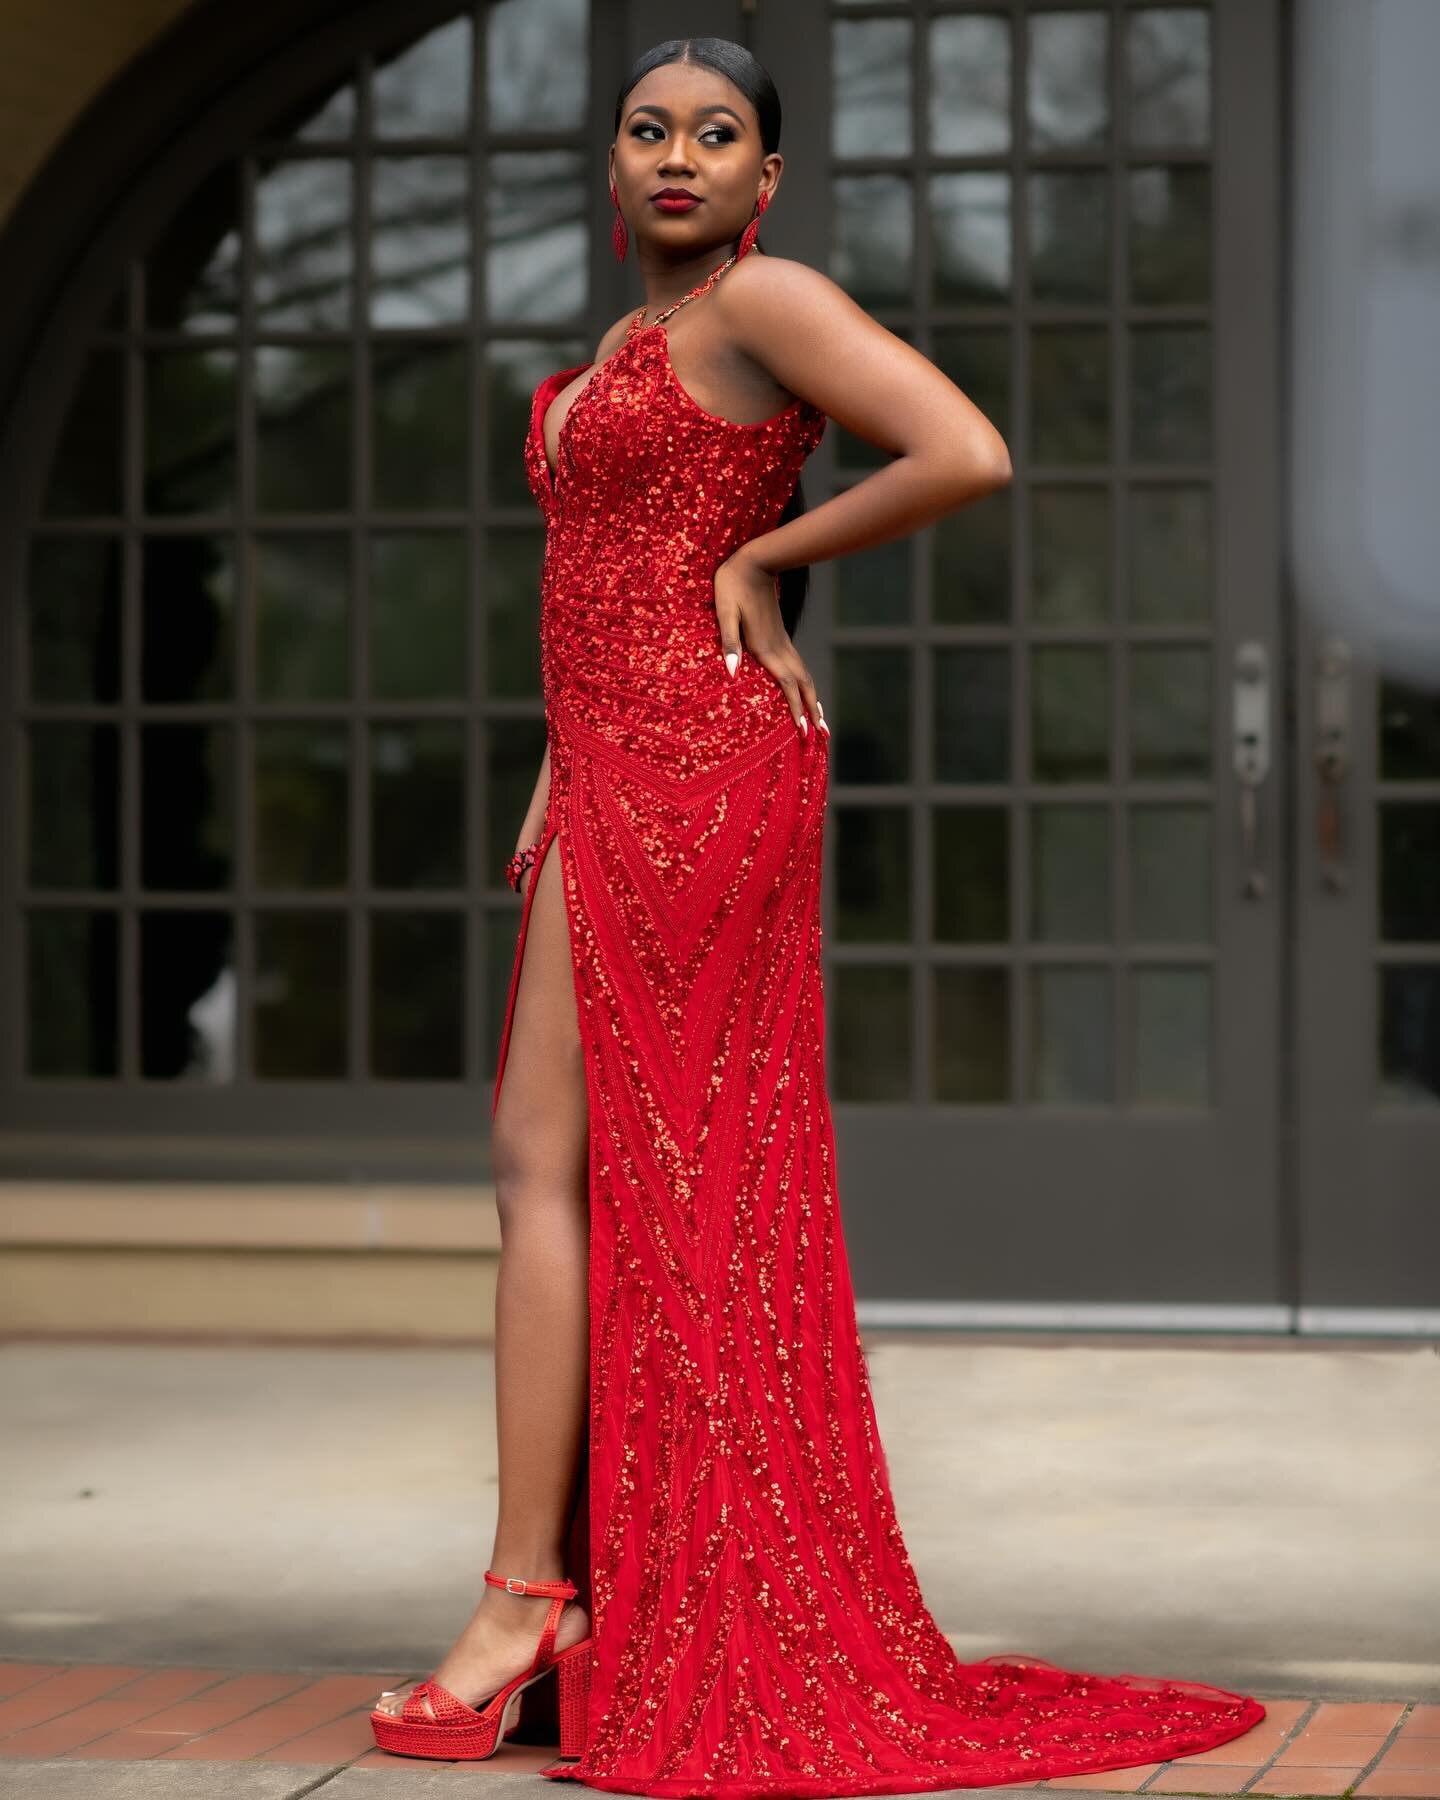 prom season will be here soon! prom photo season is not just about the photos themselves, but also about the experience. it&rsquo;s a chance  to bond with friends and create lasting memories. from getting ready together to striking poses in front of 